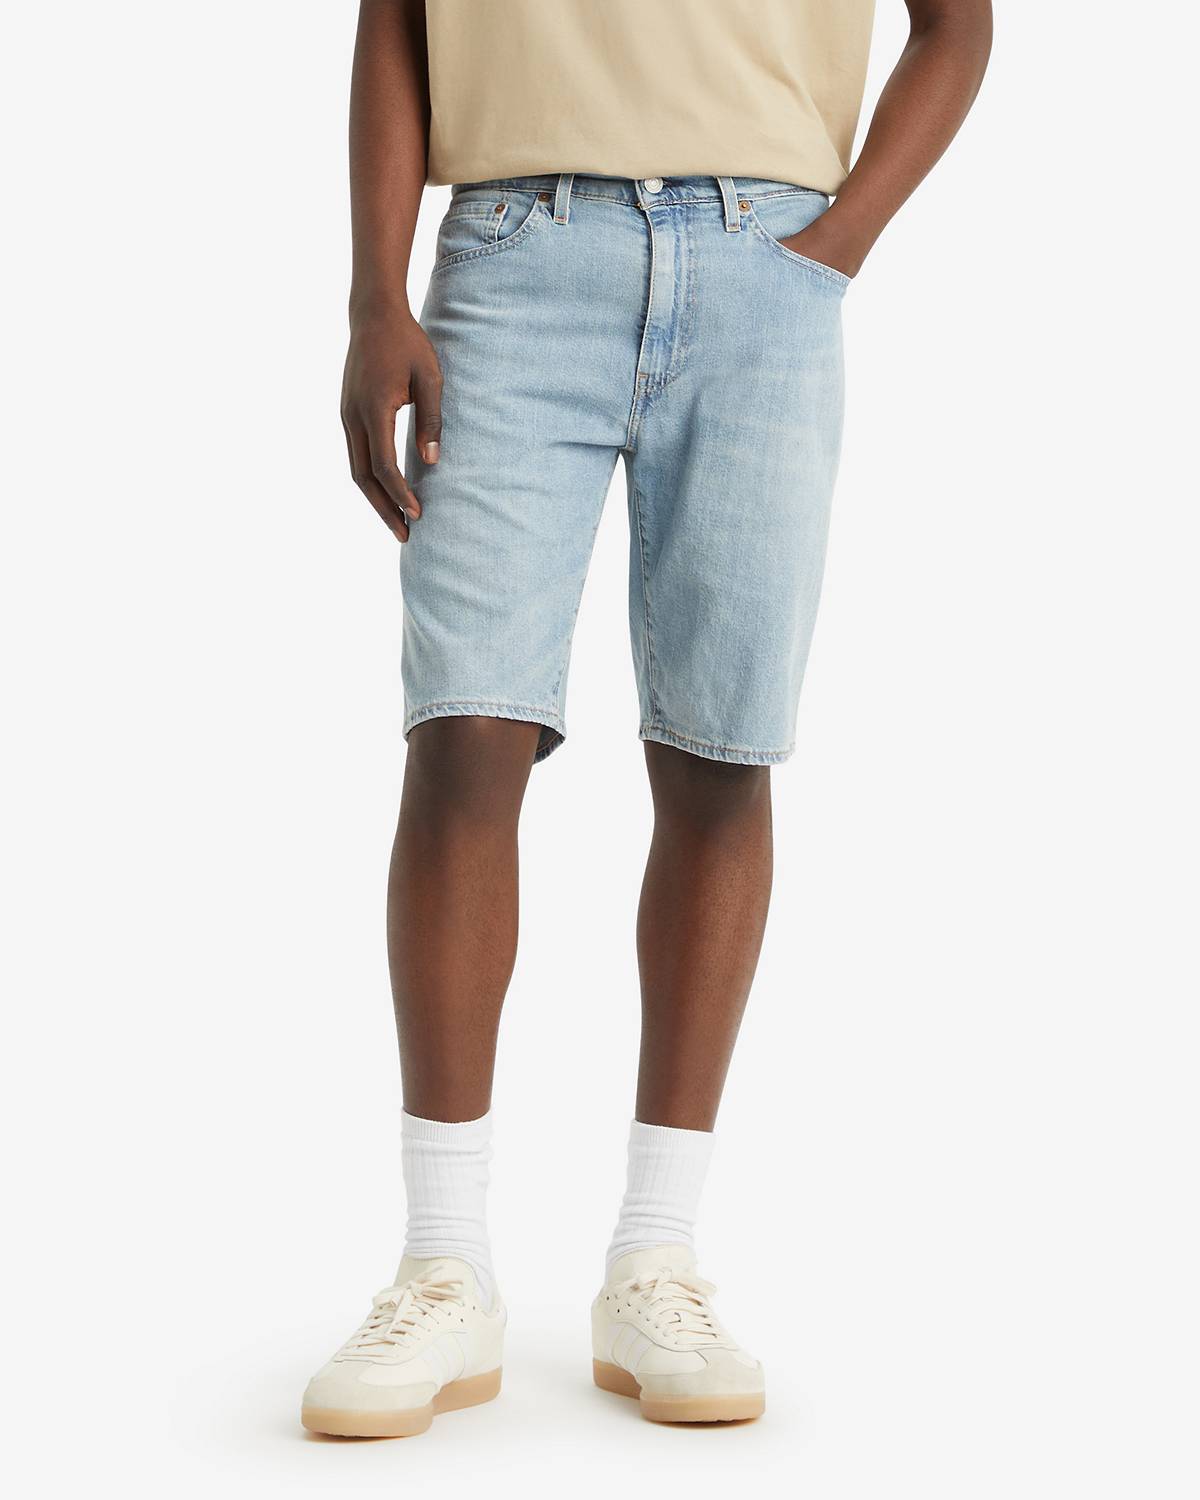 Loose Fit Shorts with 30% discount!